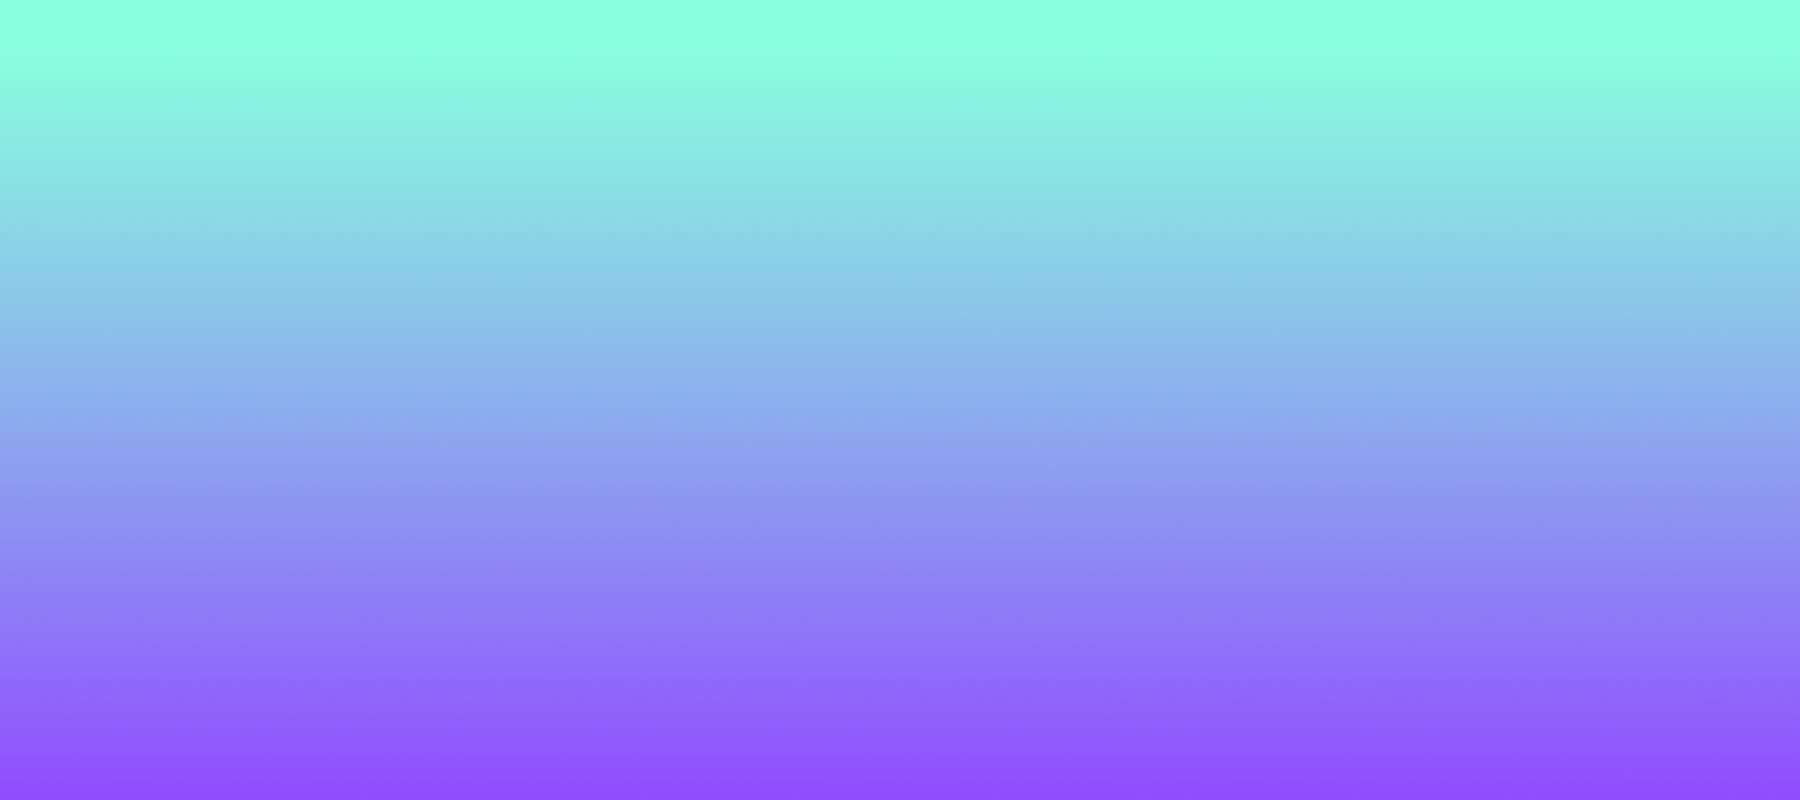 tumblr ombre gradient background 3. Background Check All